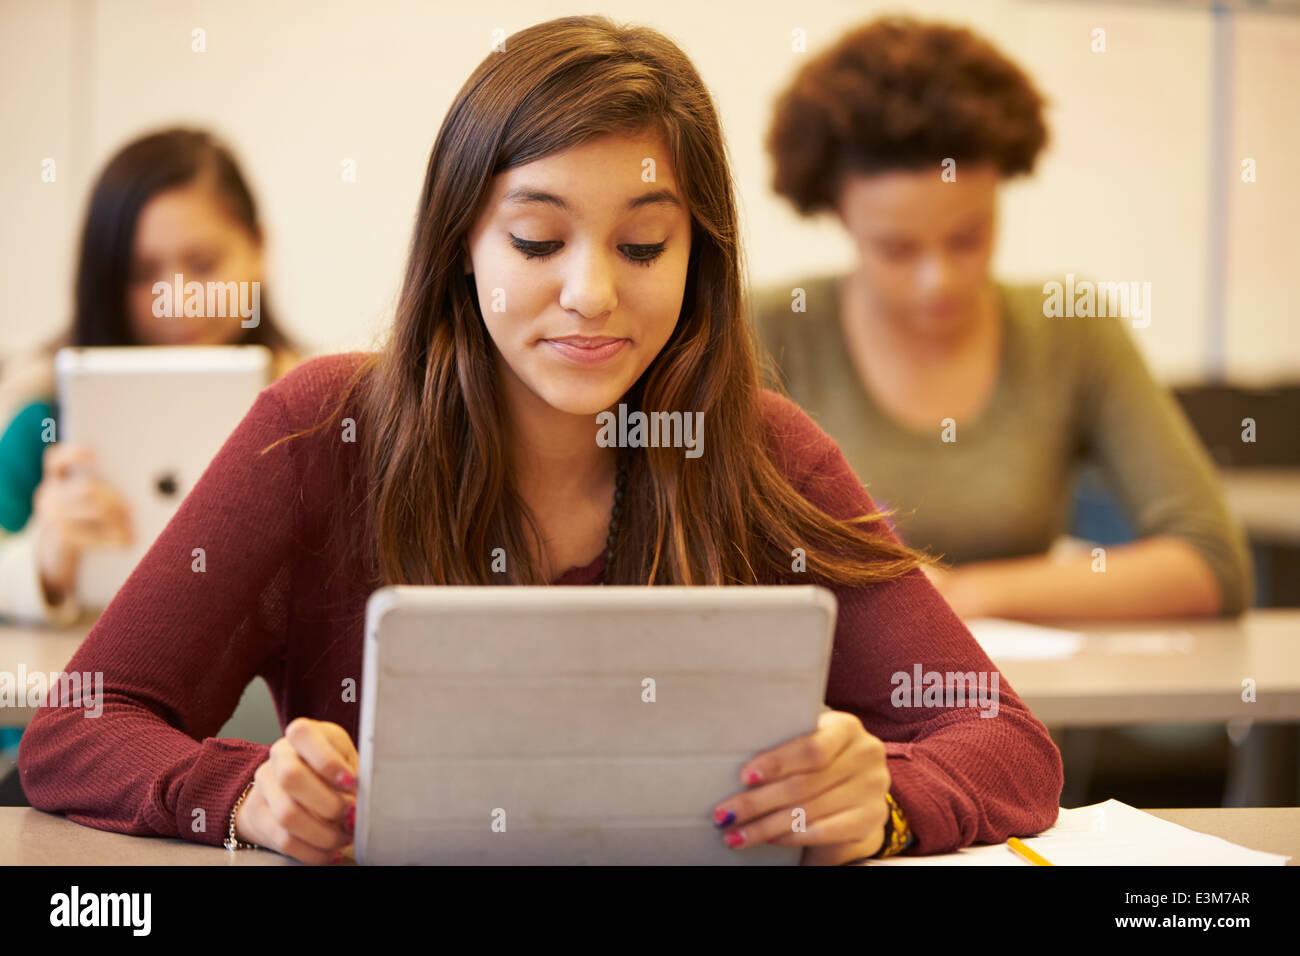 High School Student At Desk In Class Using Digital Tablet Stock Photo